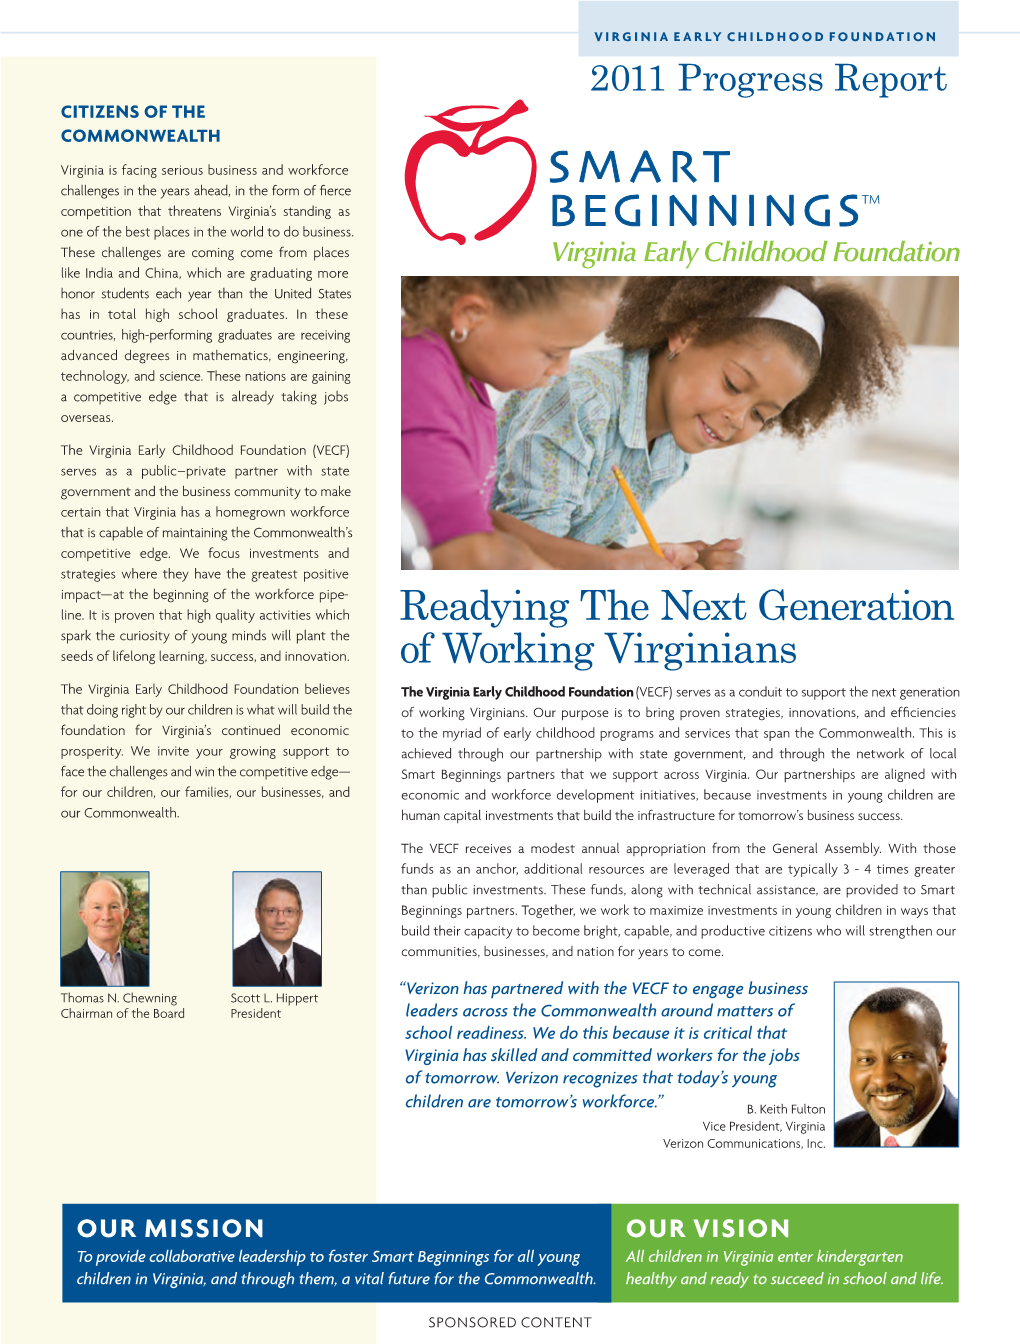 Readying the Next Generation of Working Virginians